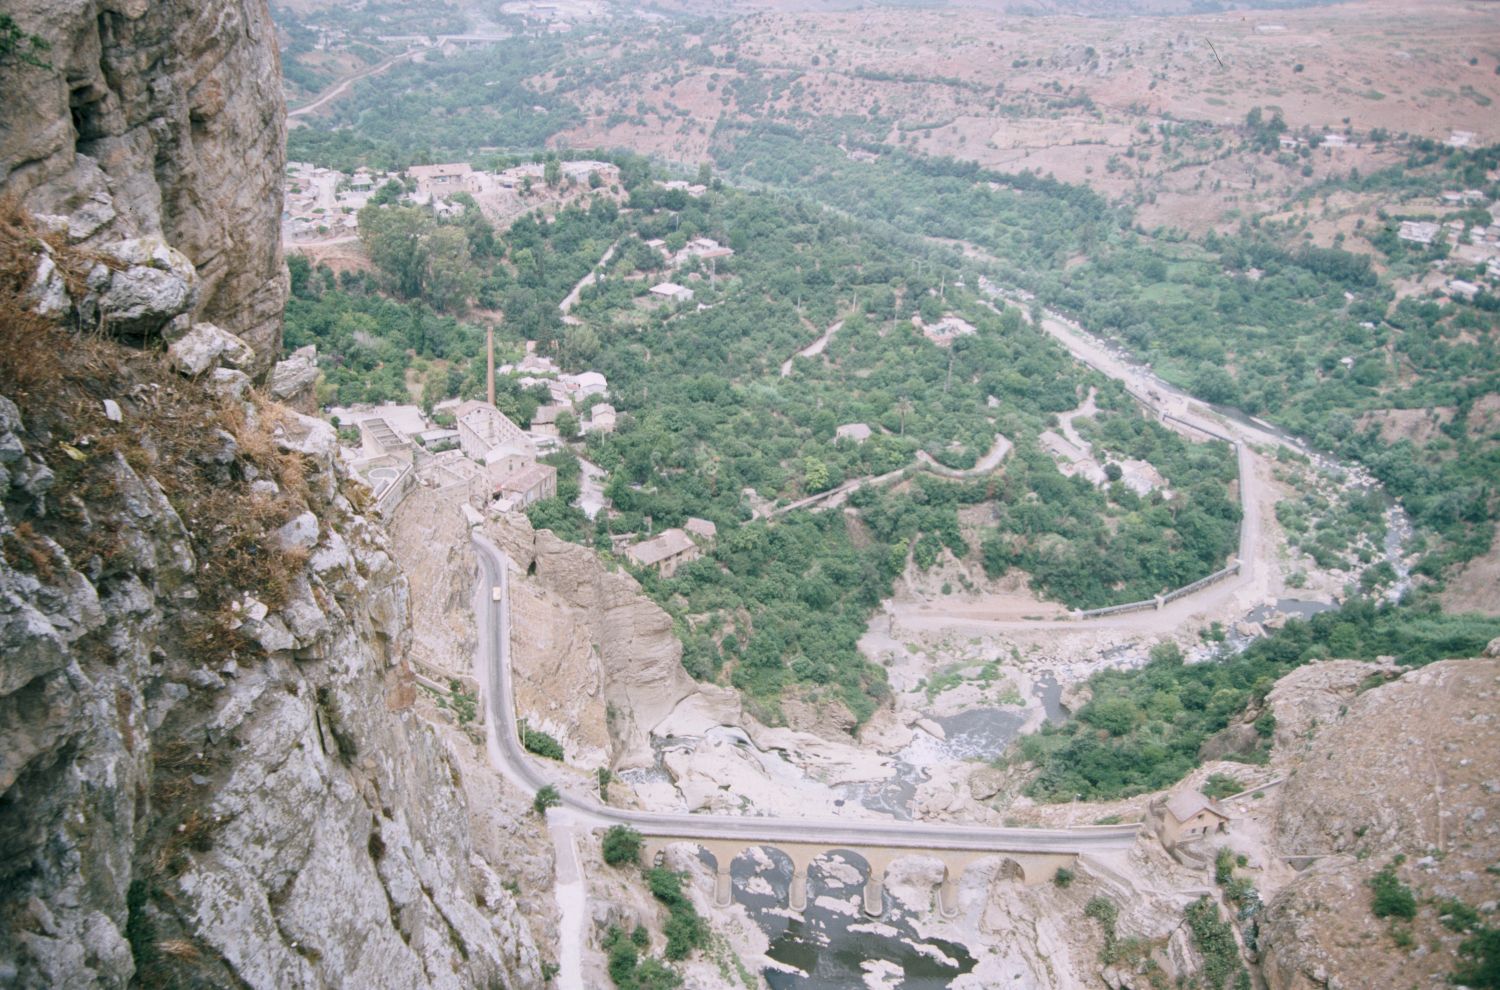 General view eastward of Rhumel Gorge, with Centre Hospitalo-Universitaire Benbadis in background